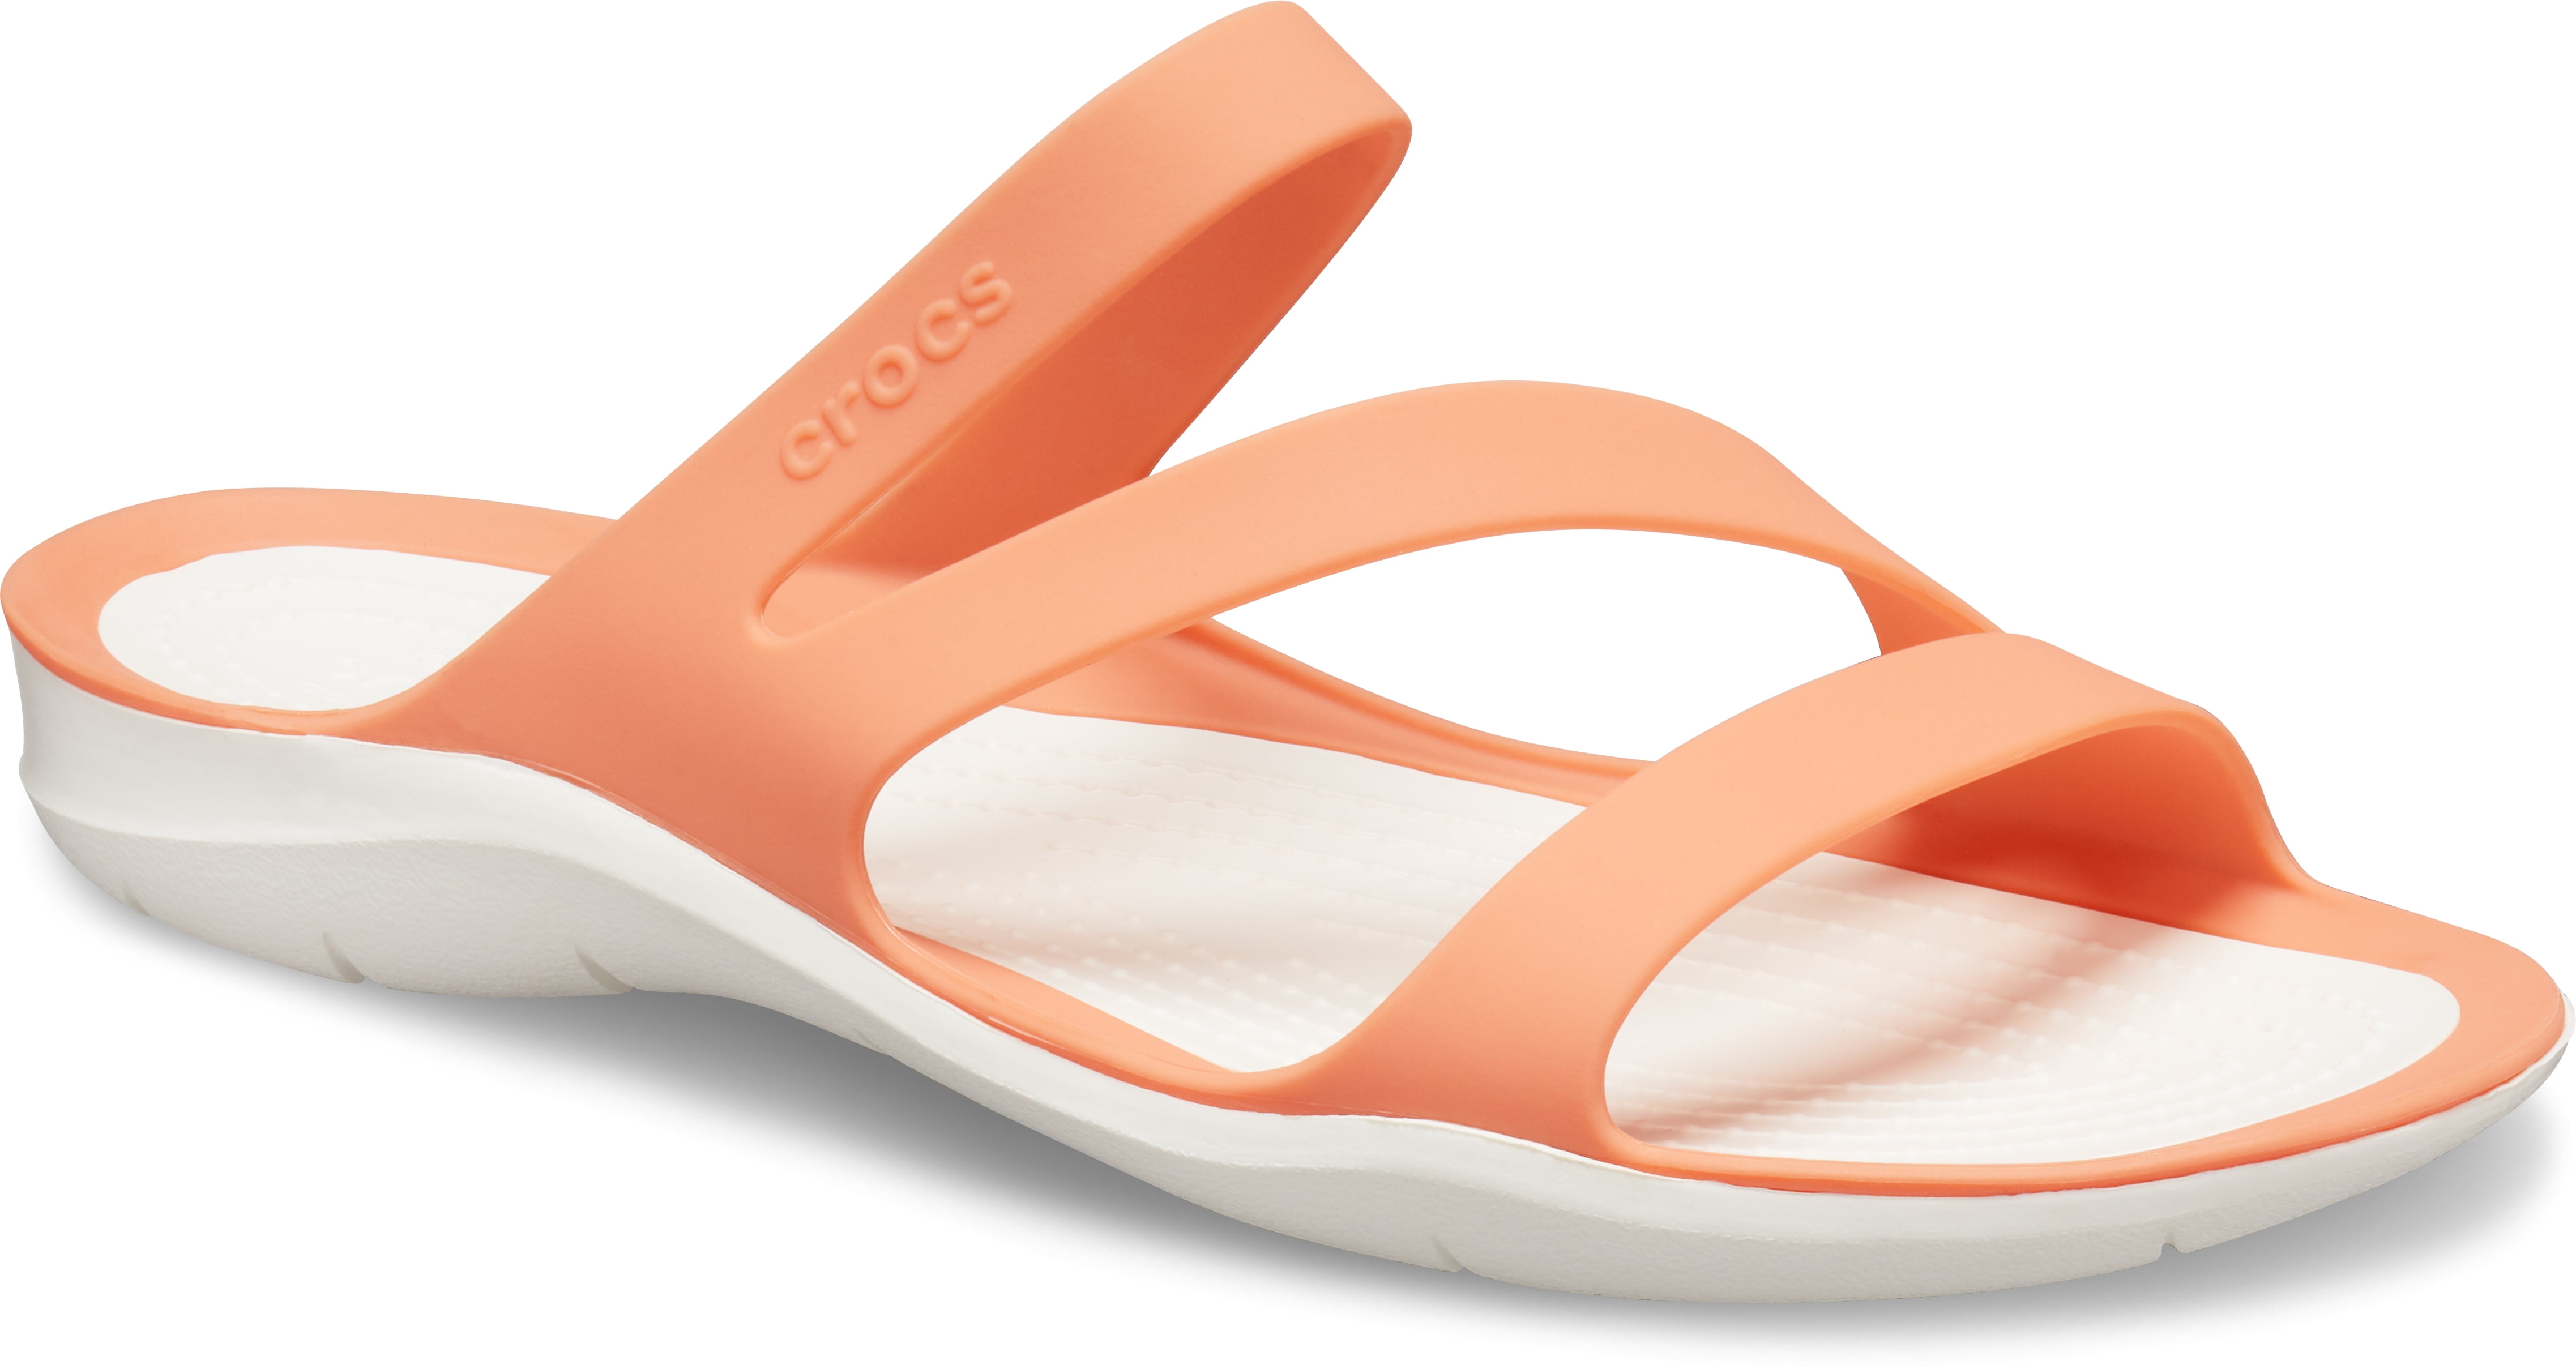 Crocs Womens Swiftwater Sandal Lightweight Water and Beach Shoe Casual Comfort Slip On